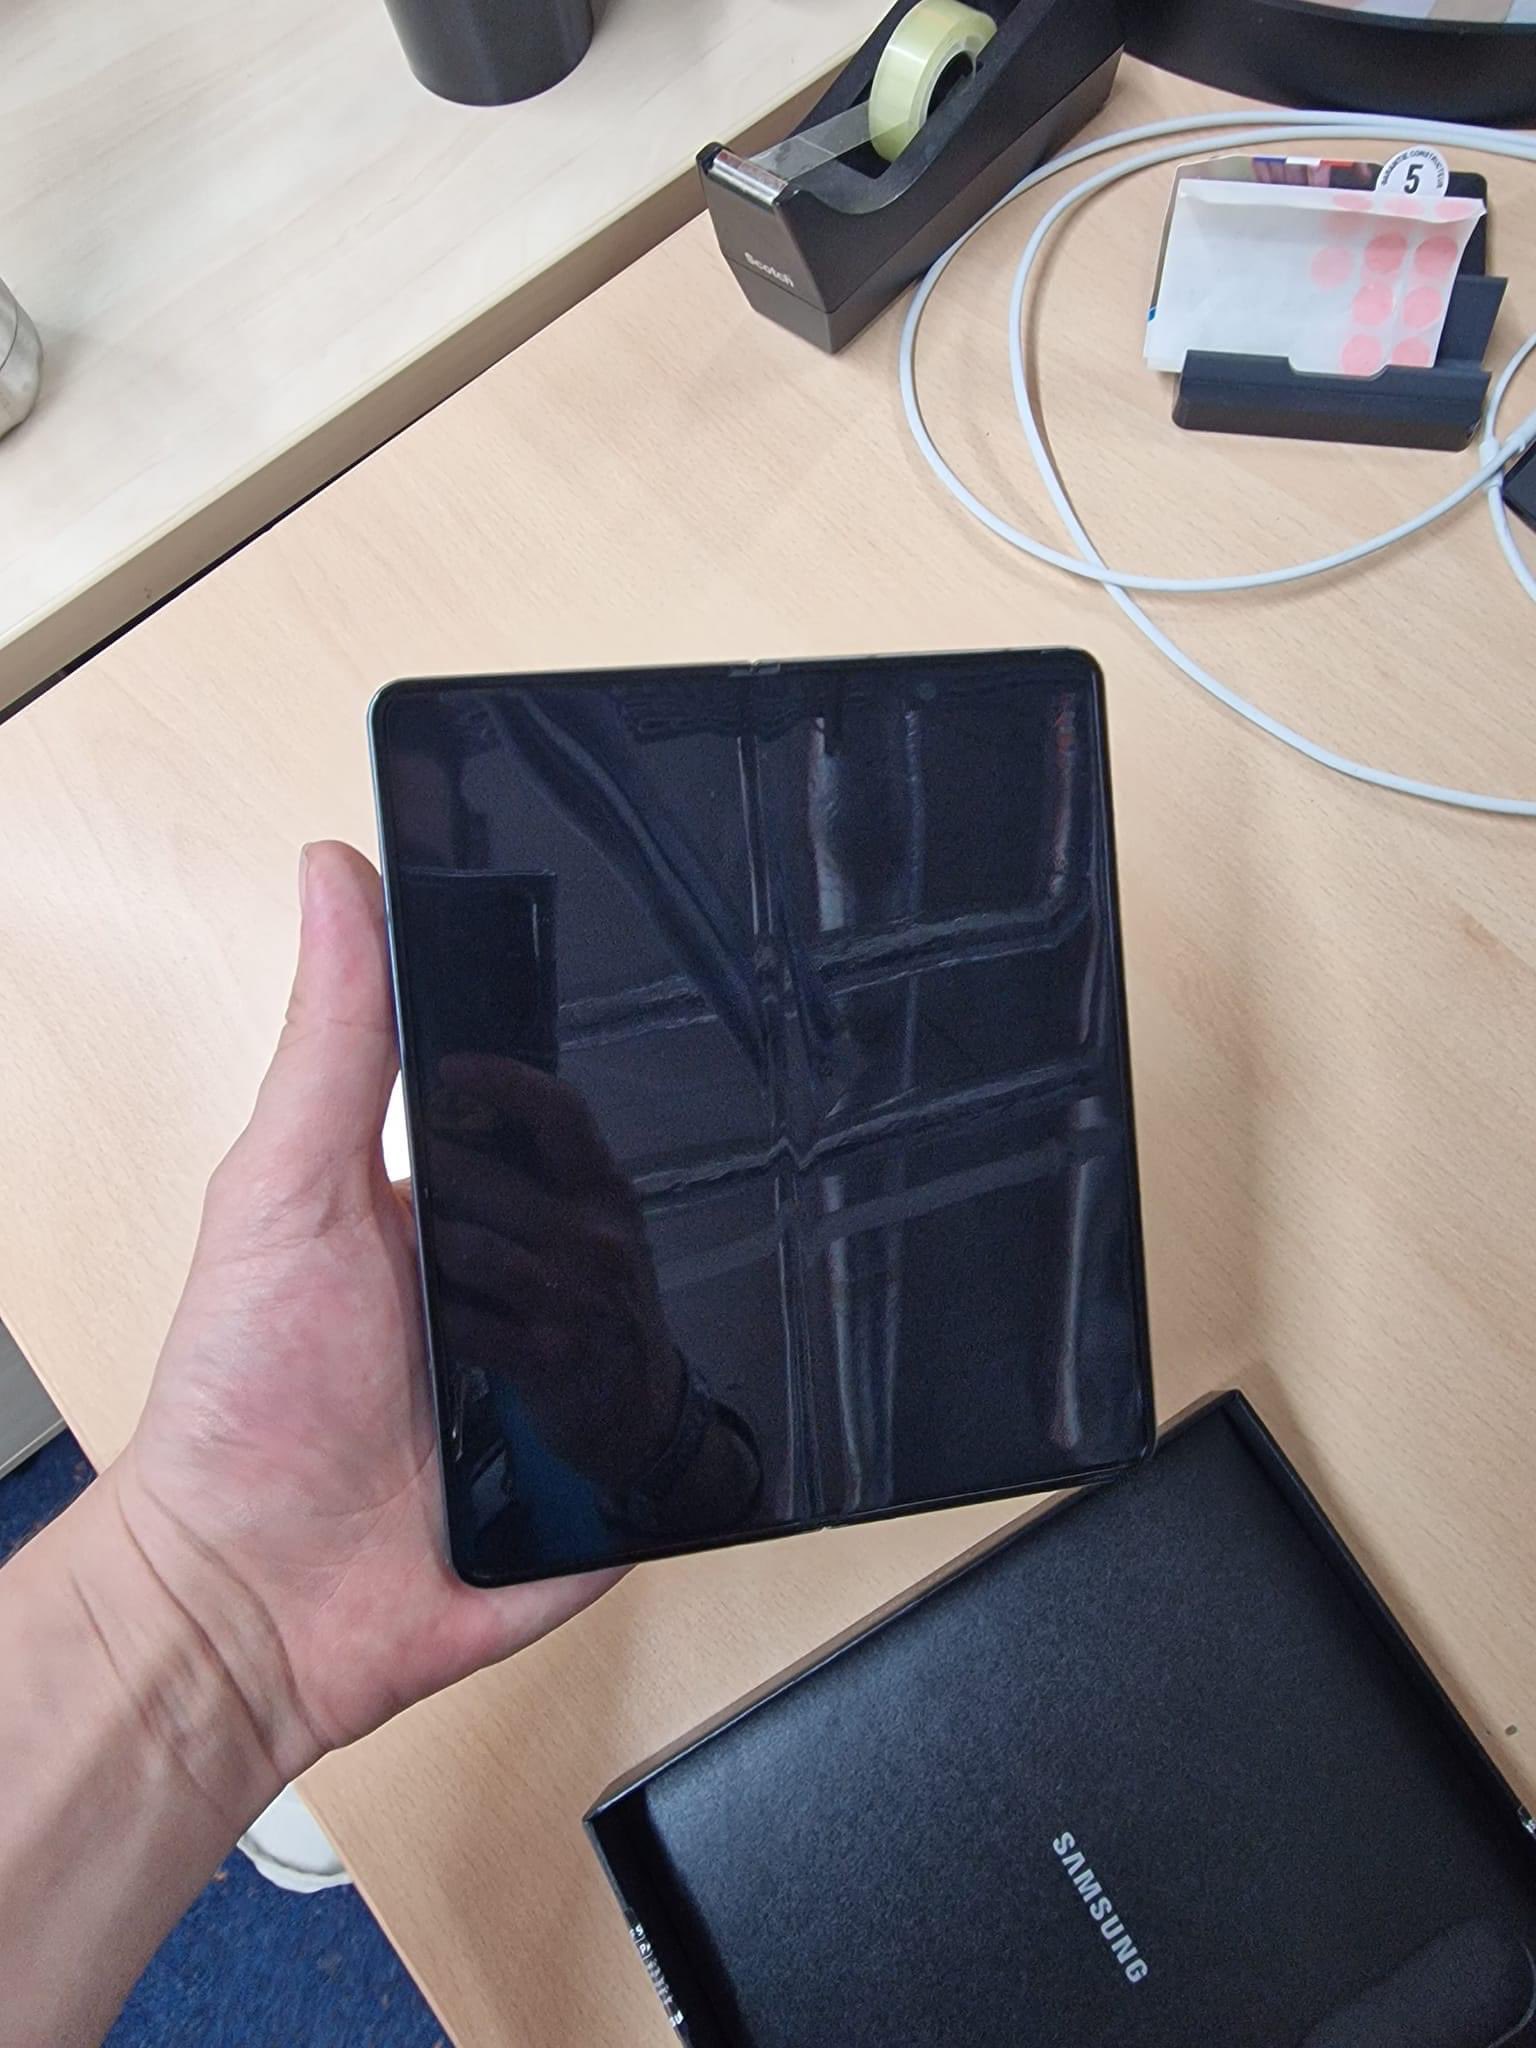 Galaxy Z Fold 4 hands-on image leaked 2